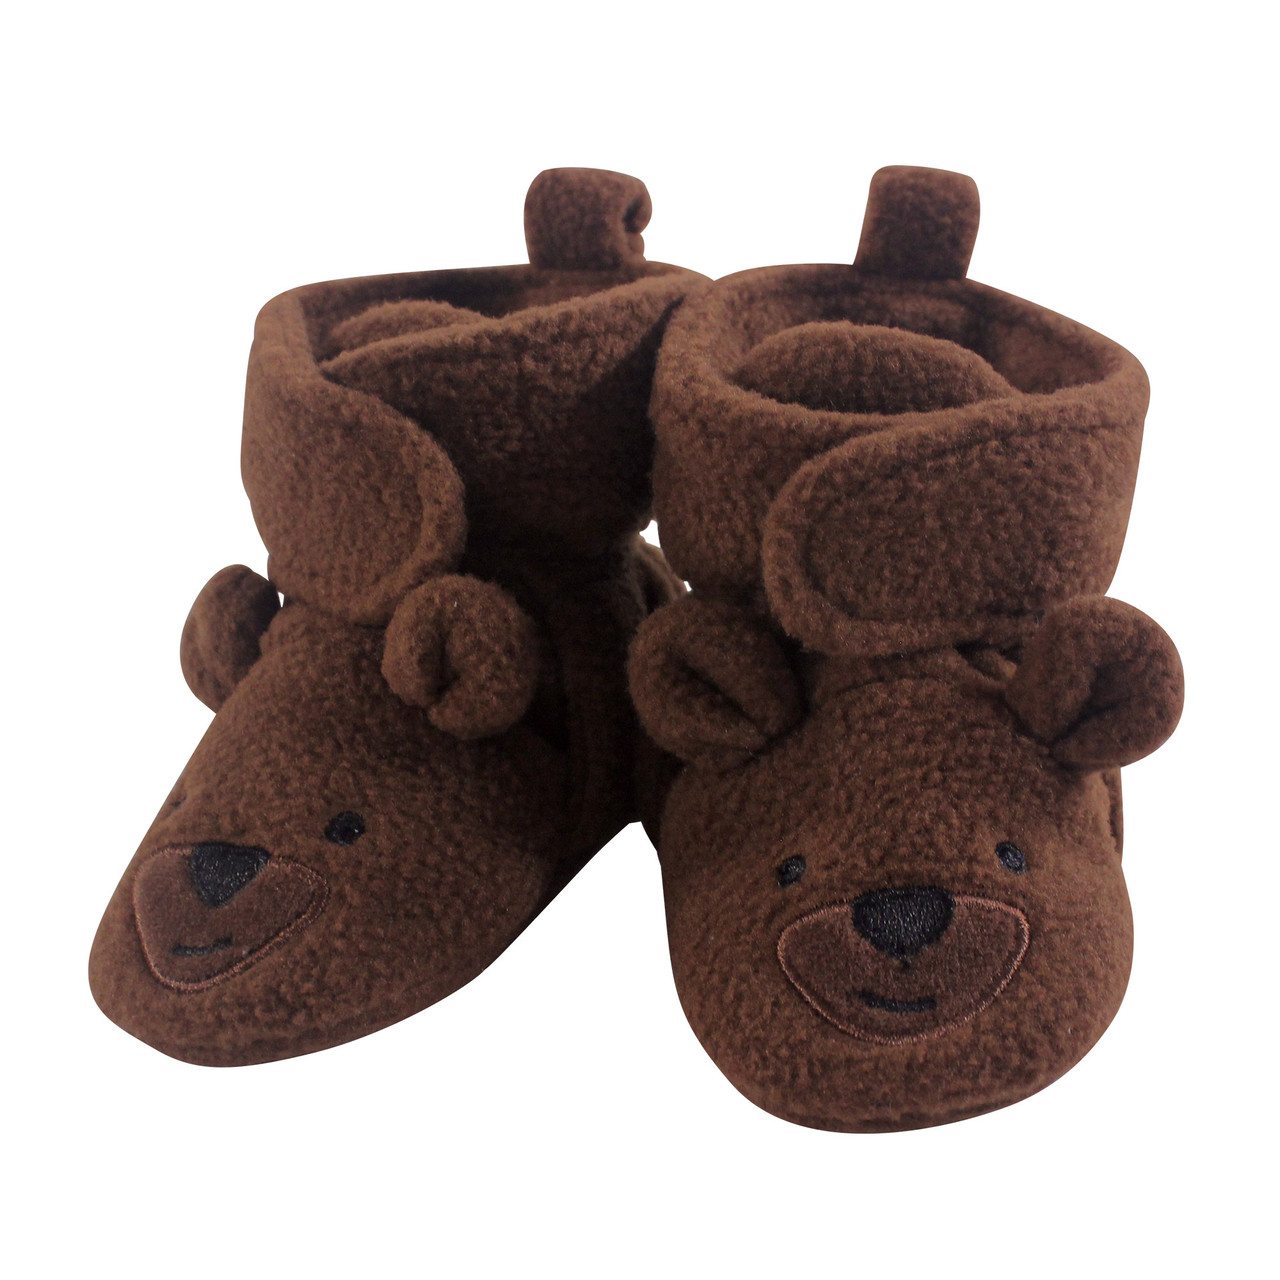 YWY Baby Boys Girls Cozy Fleece Shoes Slippers Booties with Non Skid Bottom Cotton Linling Newborn Boys Girls Infant Warm Socks Booties Slip On Crib Indoor First-Walking Shoes 